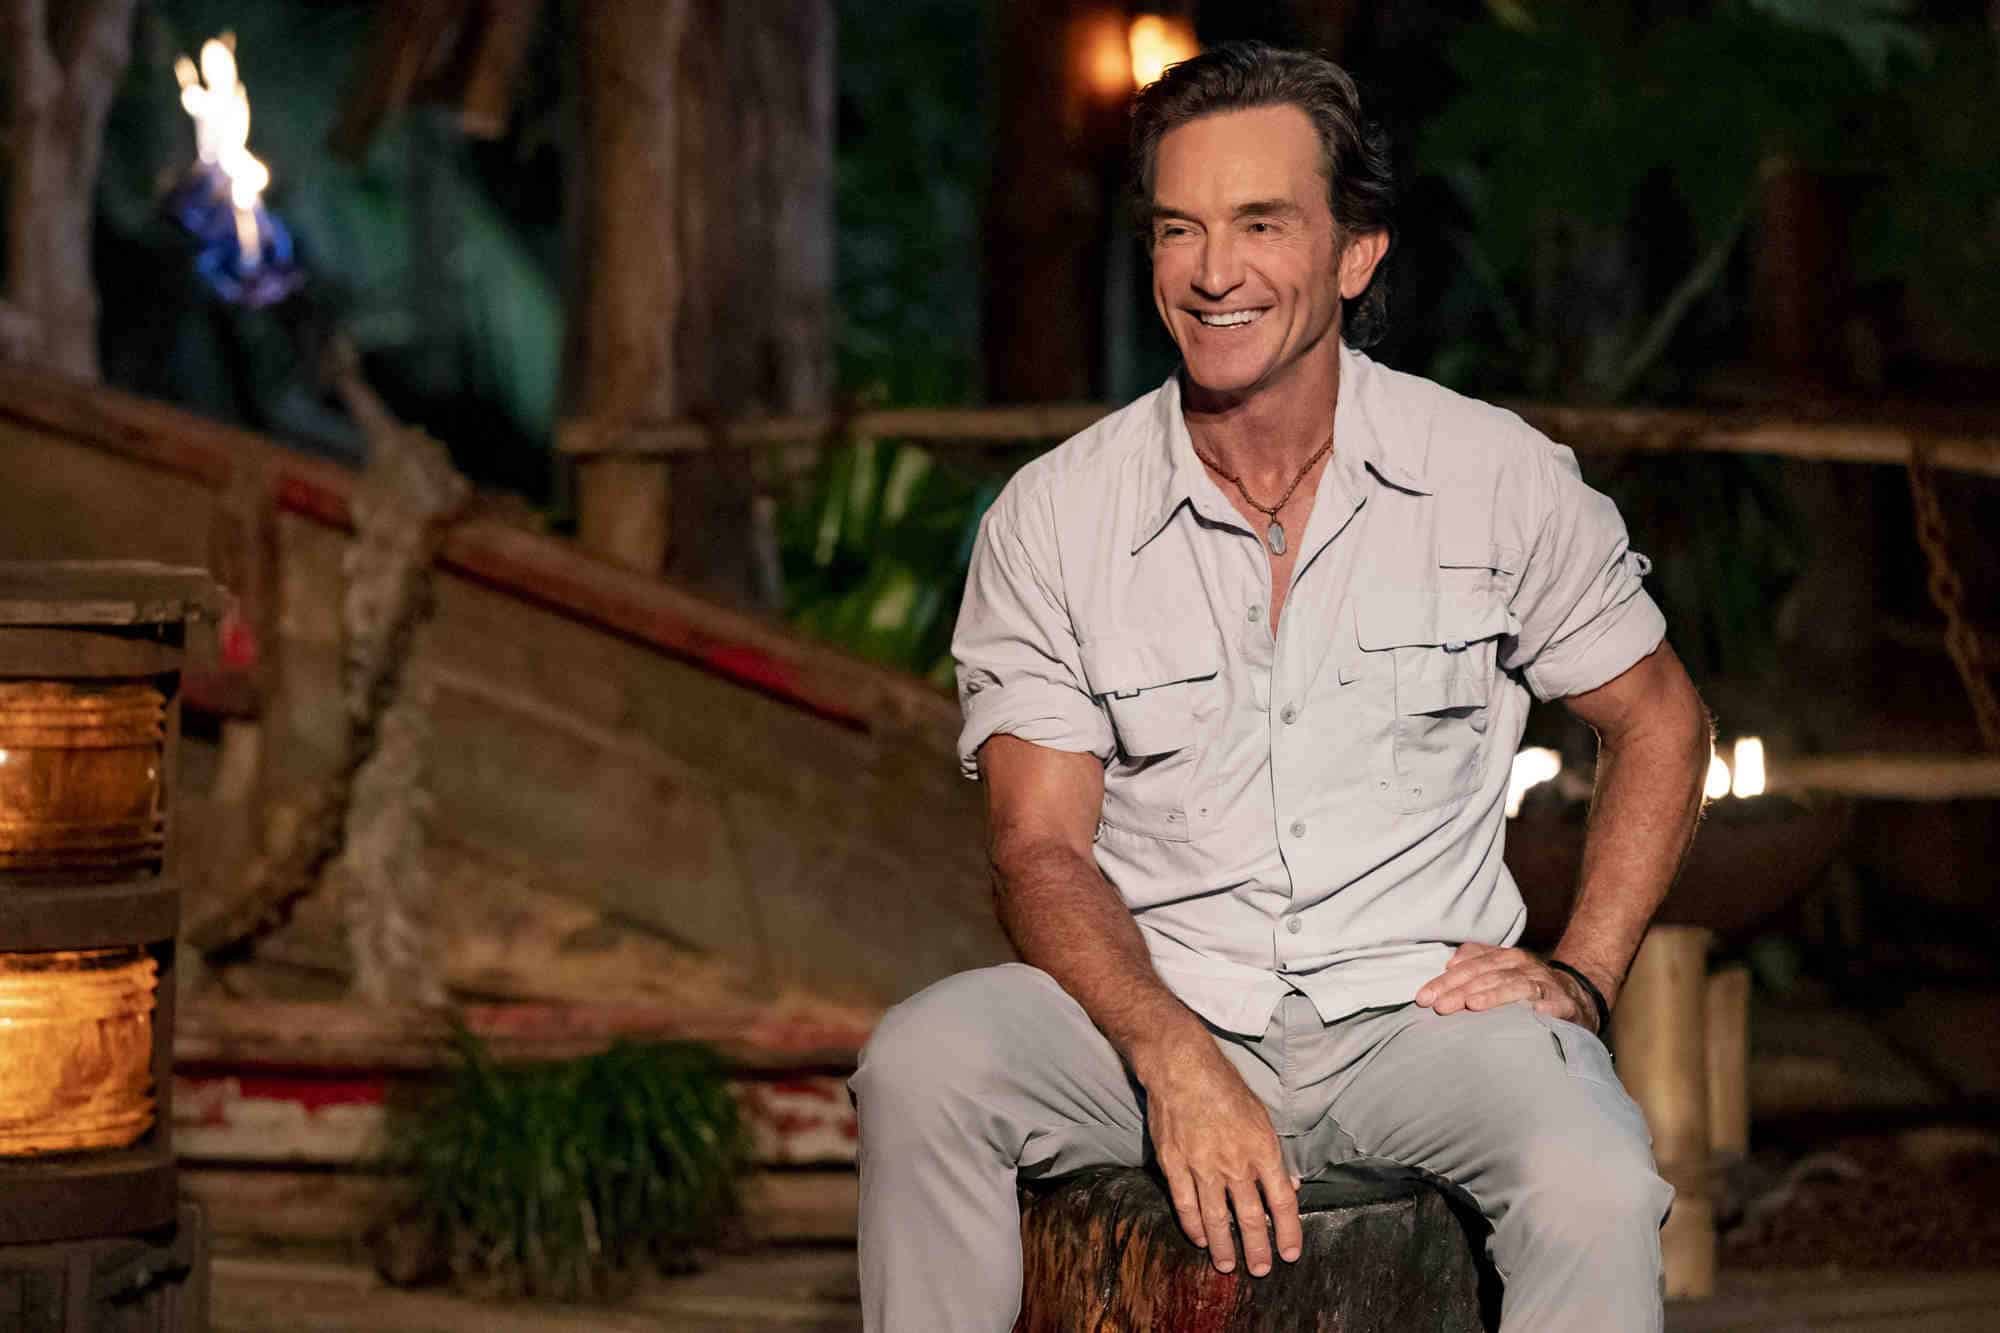 What does the 3rd place winner of Survivor get?